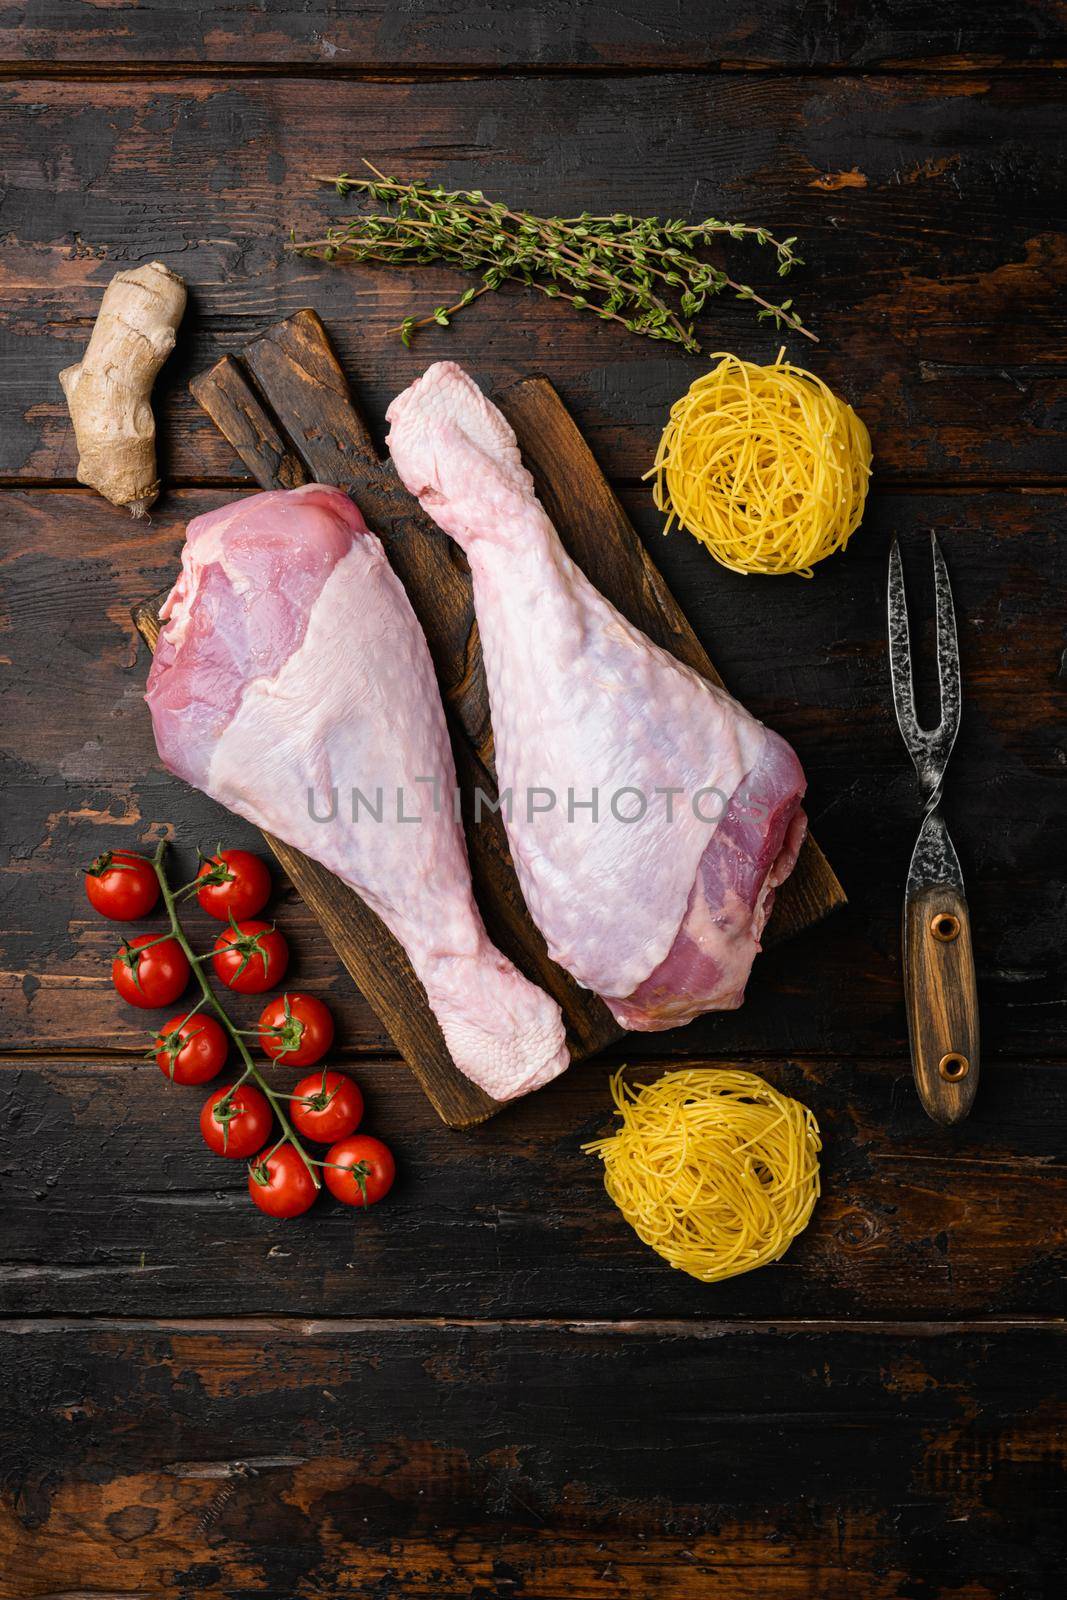 Raw turkey thigh with spices, on wooden cutting board, on old dark wooden table background, top view flat lay, with copy space for text by Ilianesolenyi